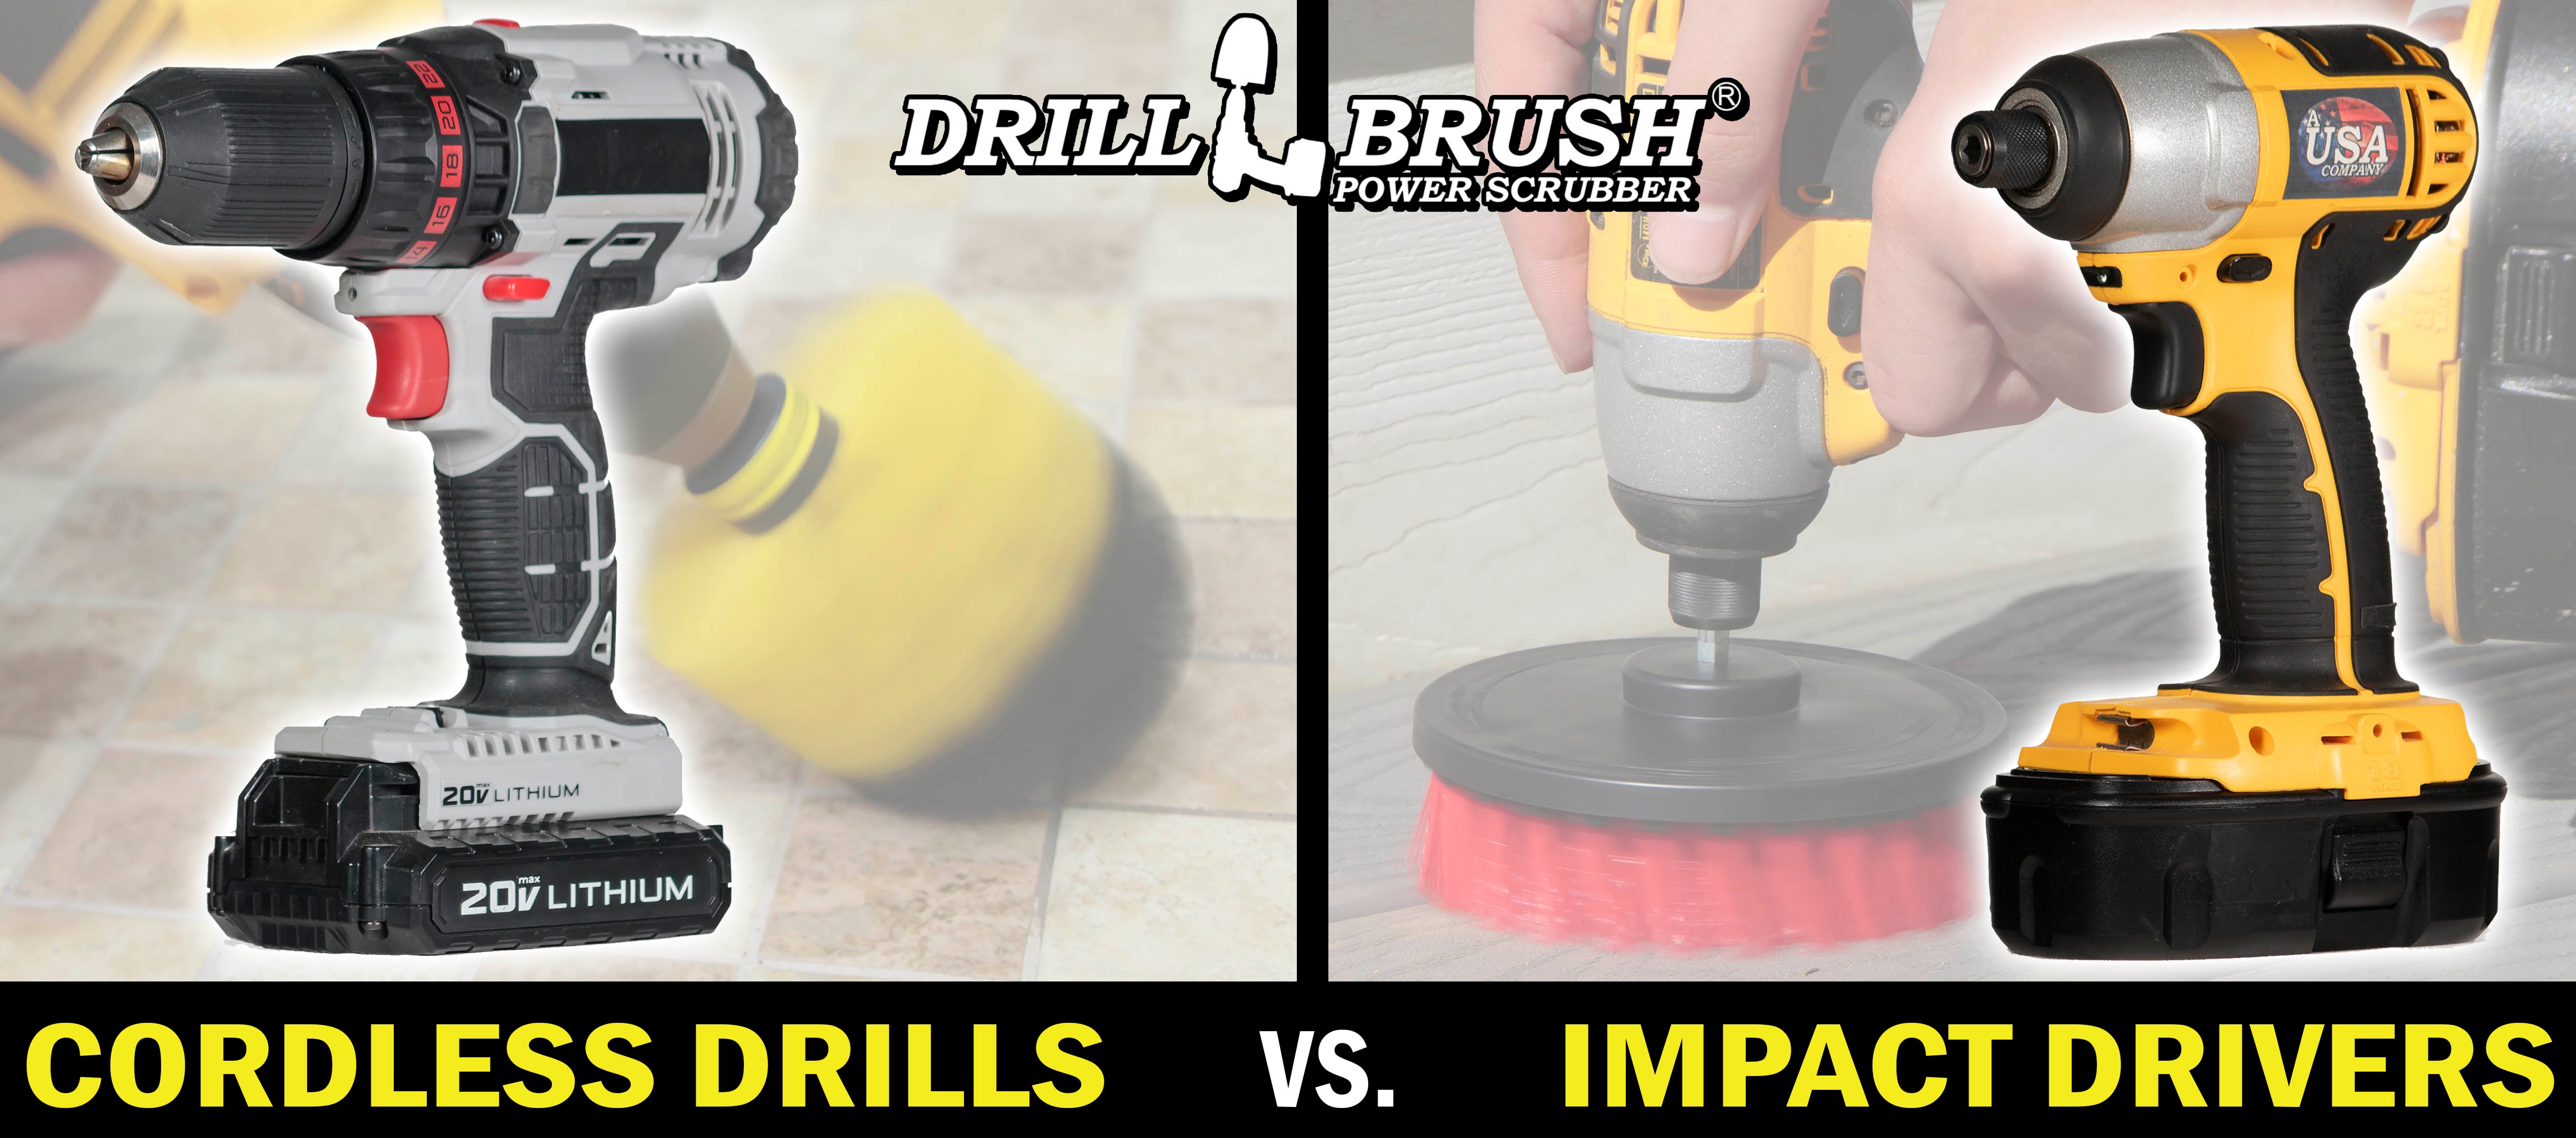 What’s the Difference Between a Cordless Drill and an Impact Driver?